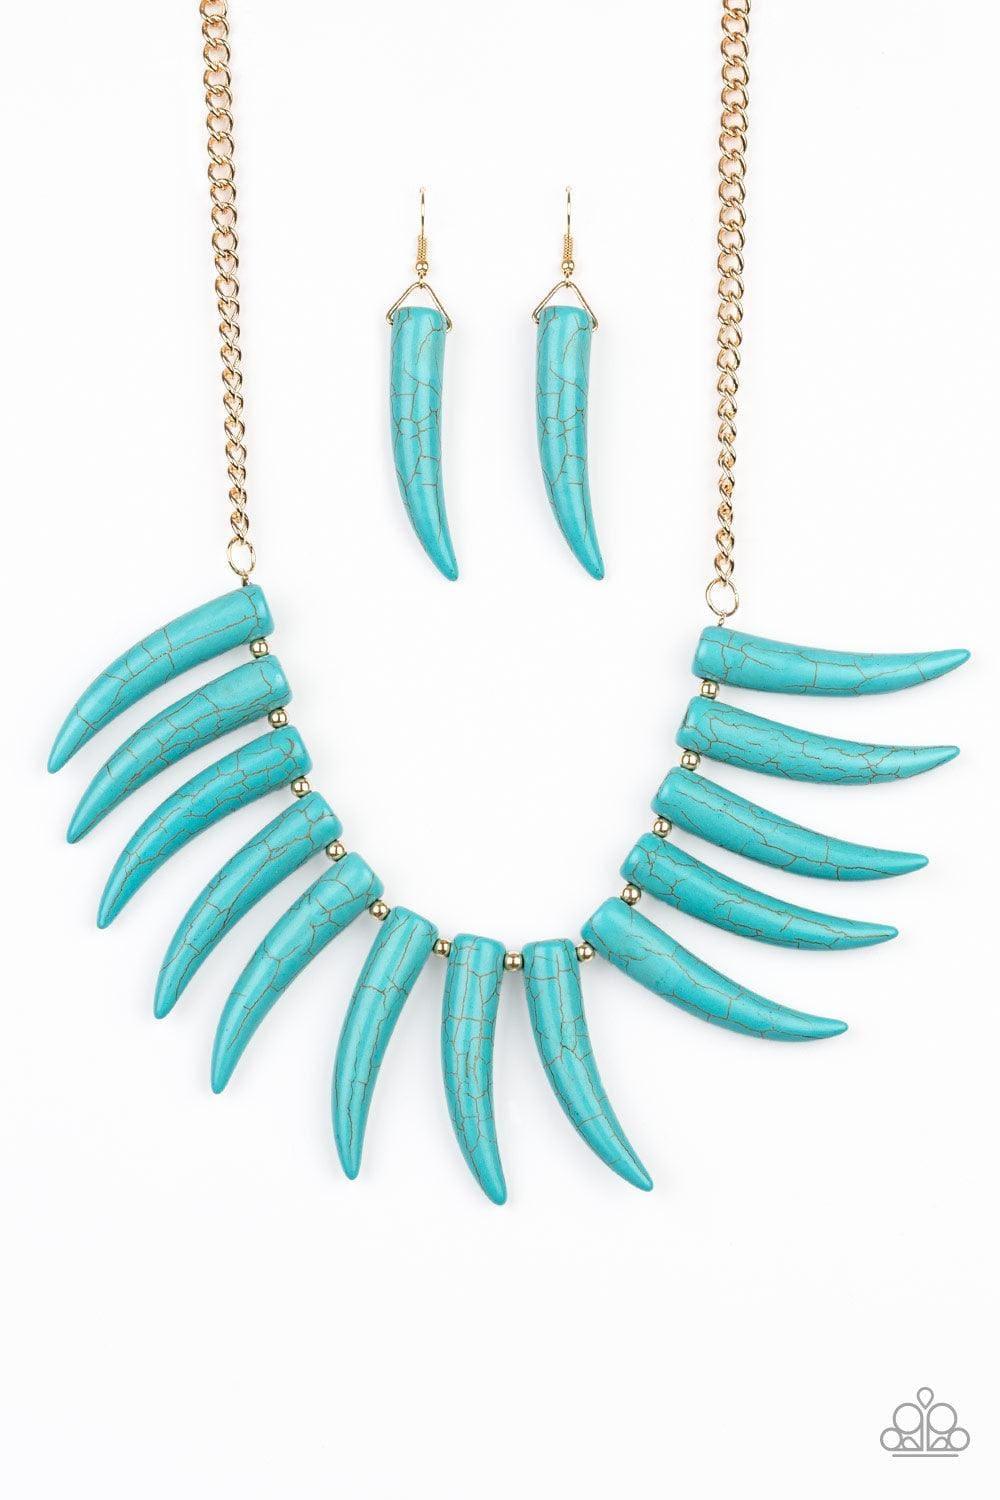 Paparazzi Accessories - Tusk Tundra - Blue Necklace - Bling by JessieK